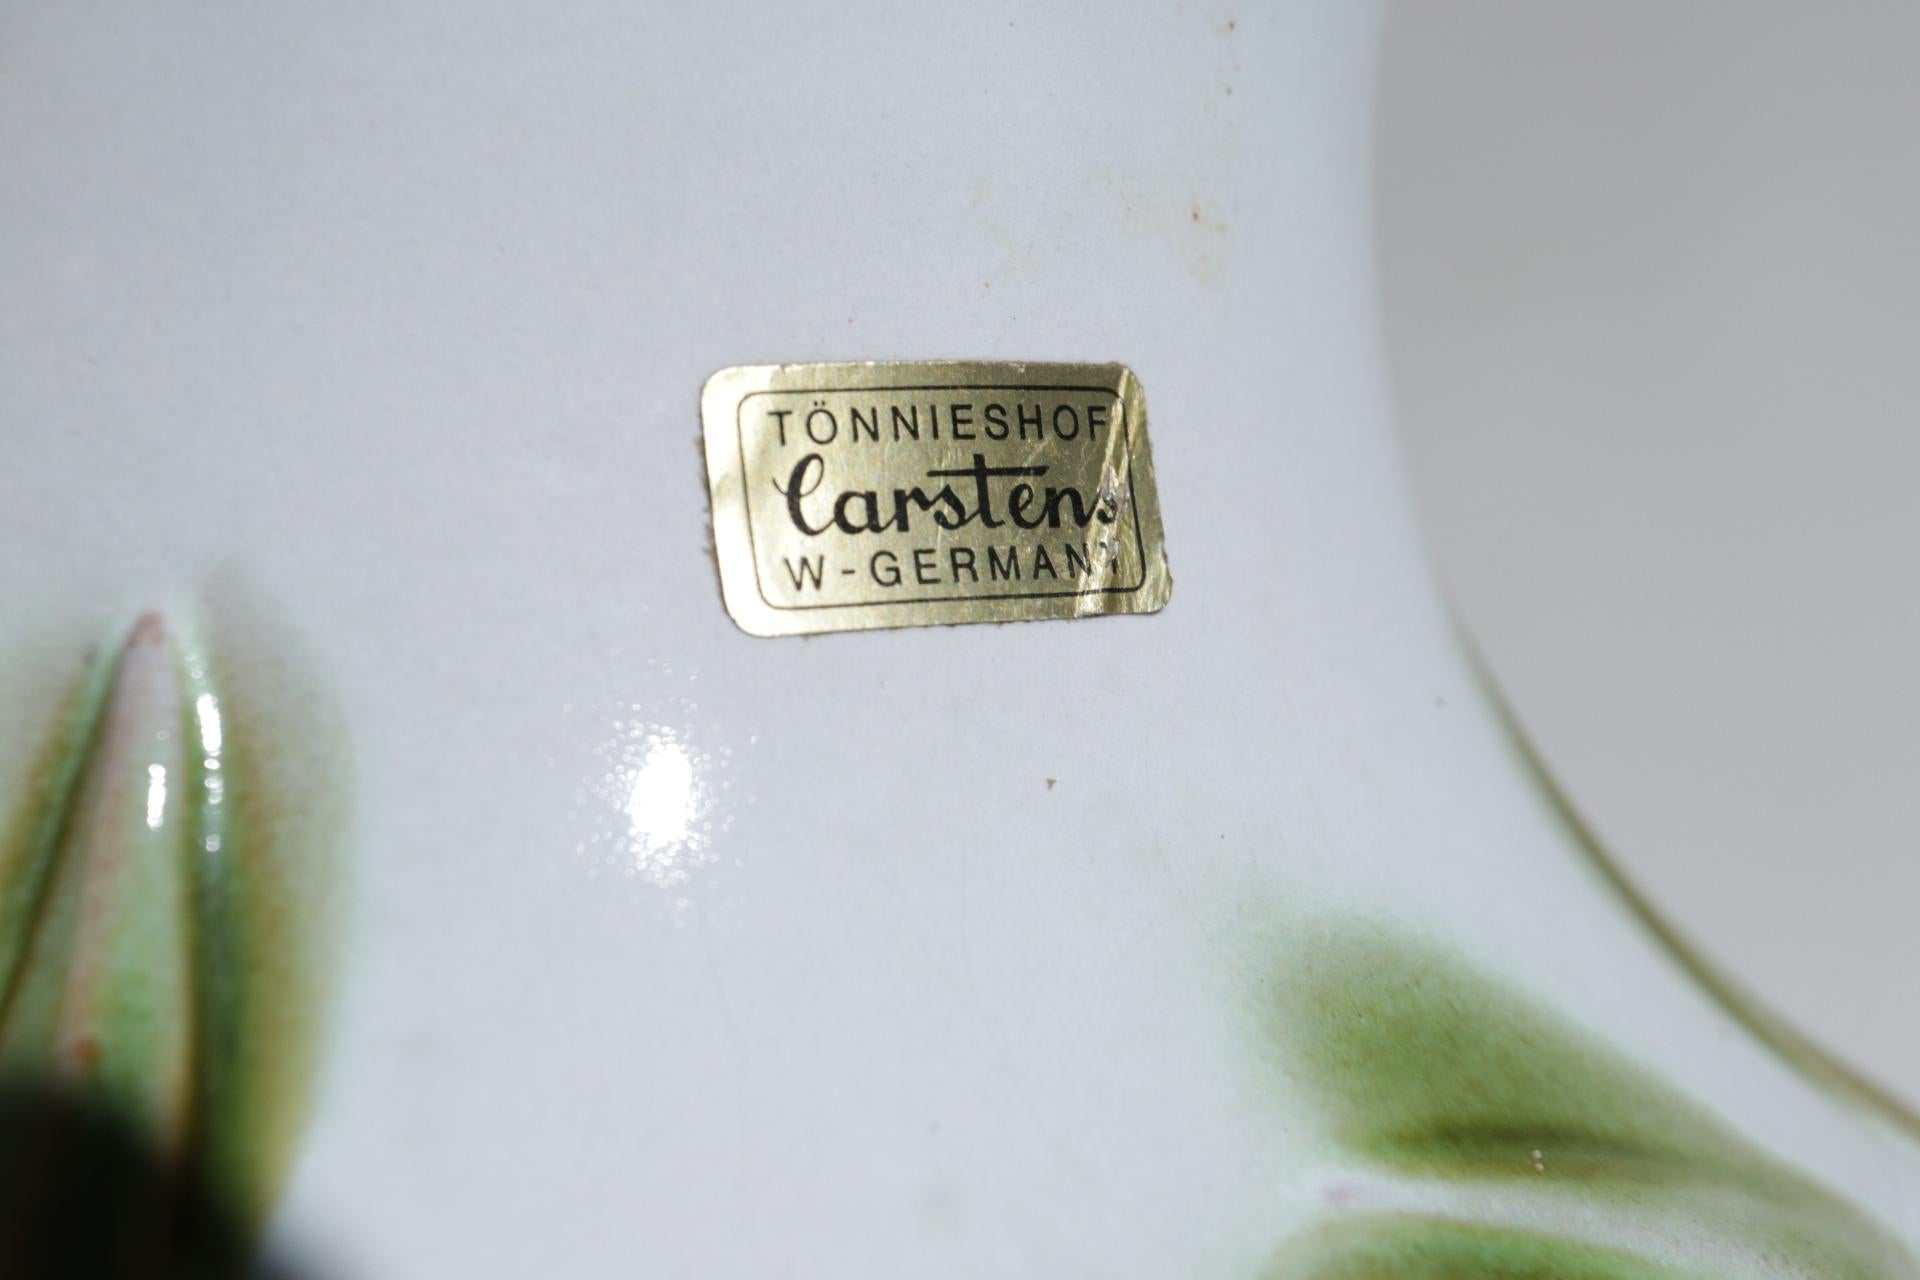 Large ceramic vase made in Germany by Cartens in the 1960s with a very beautiful Bamboo design.
Carstens only produced copies in limited amounts of each design.
Stamped underneath with the production series and “W. GERMANY” mark.
Carstens